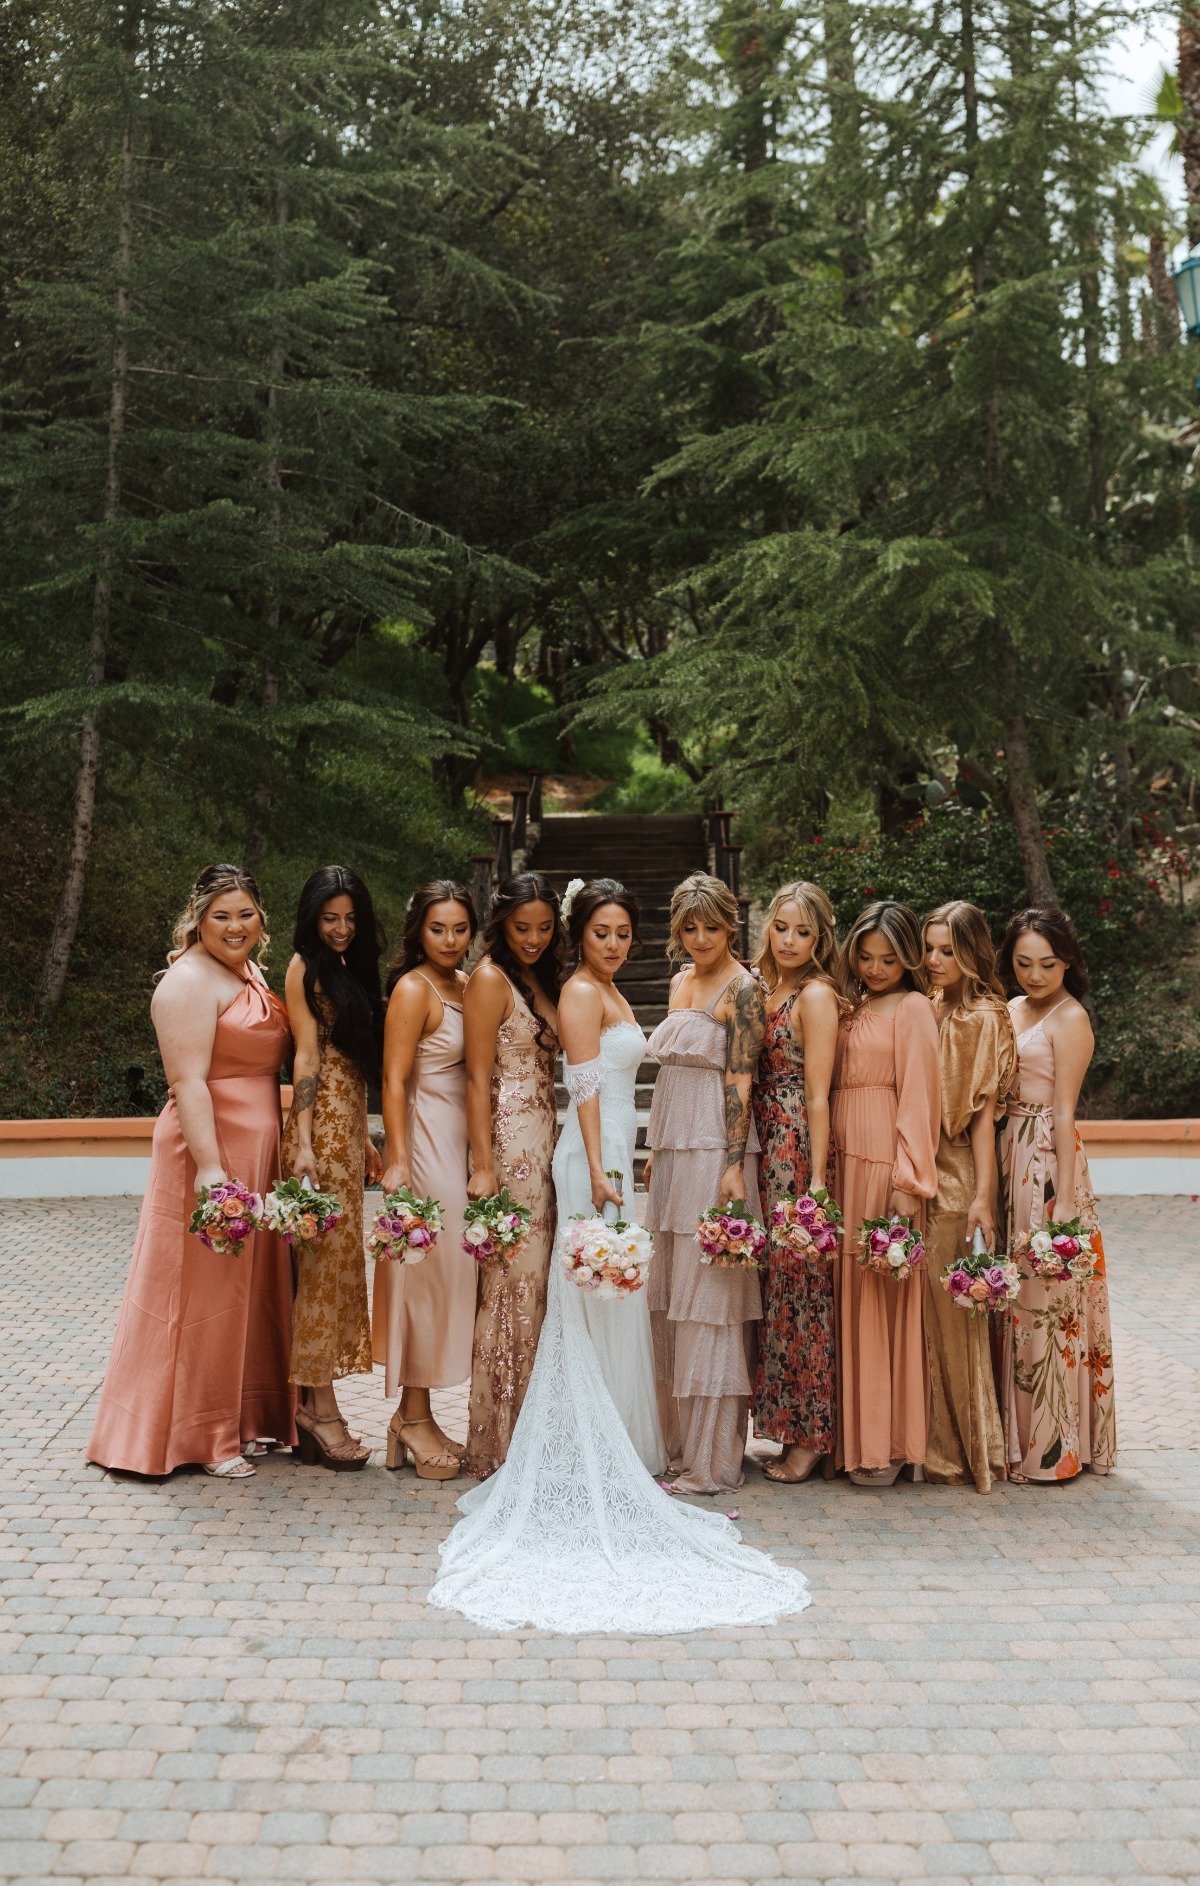 A bride and her bridesmaids in different shades of pink dresses